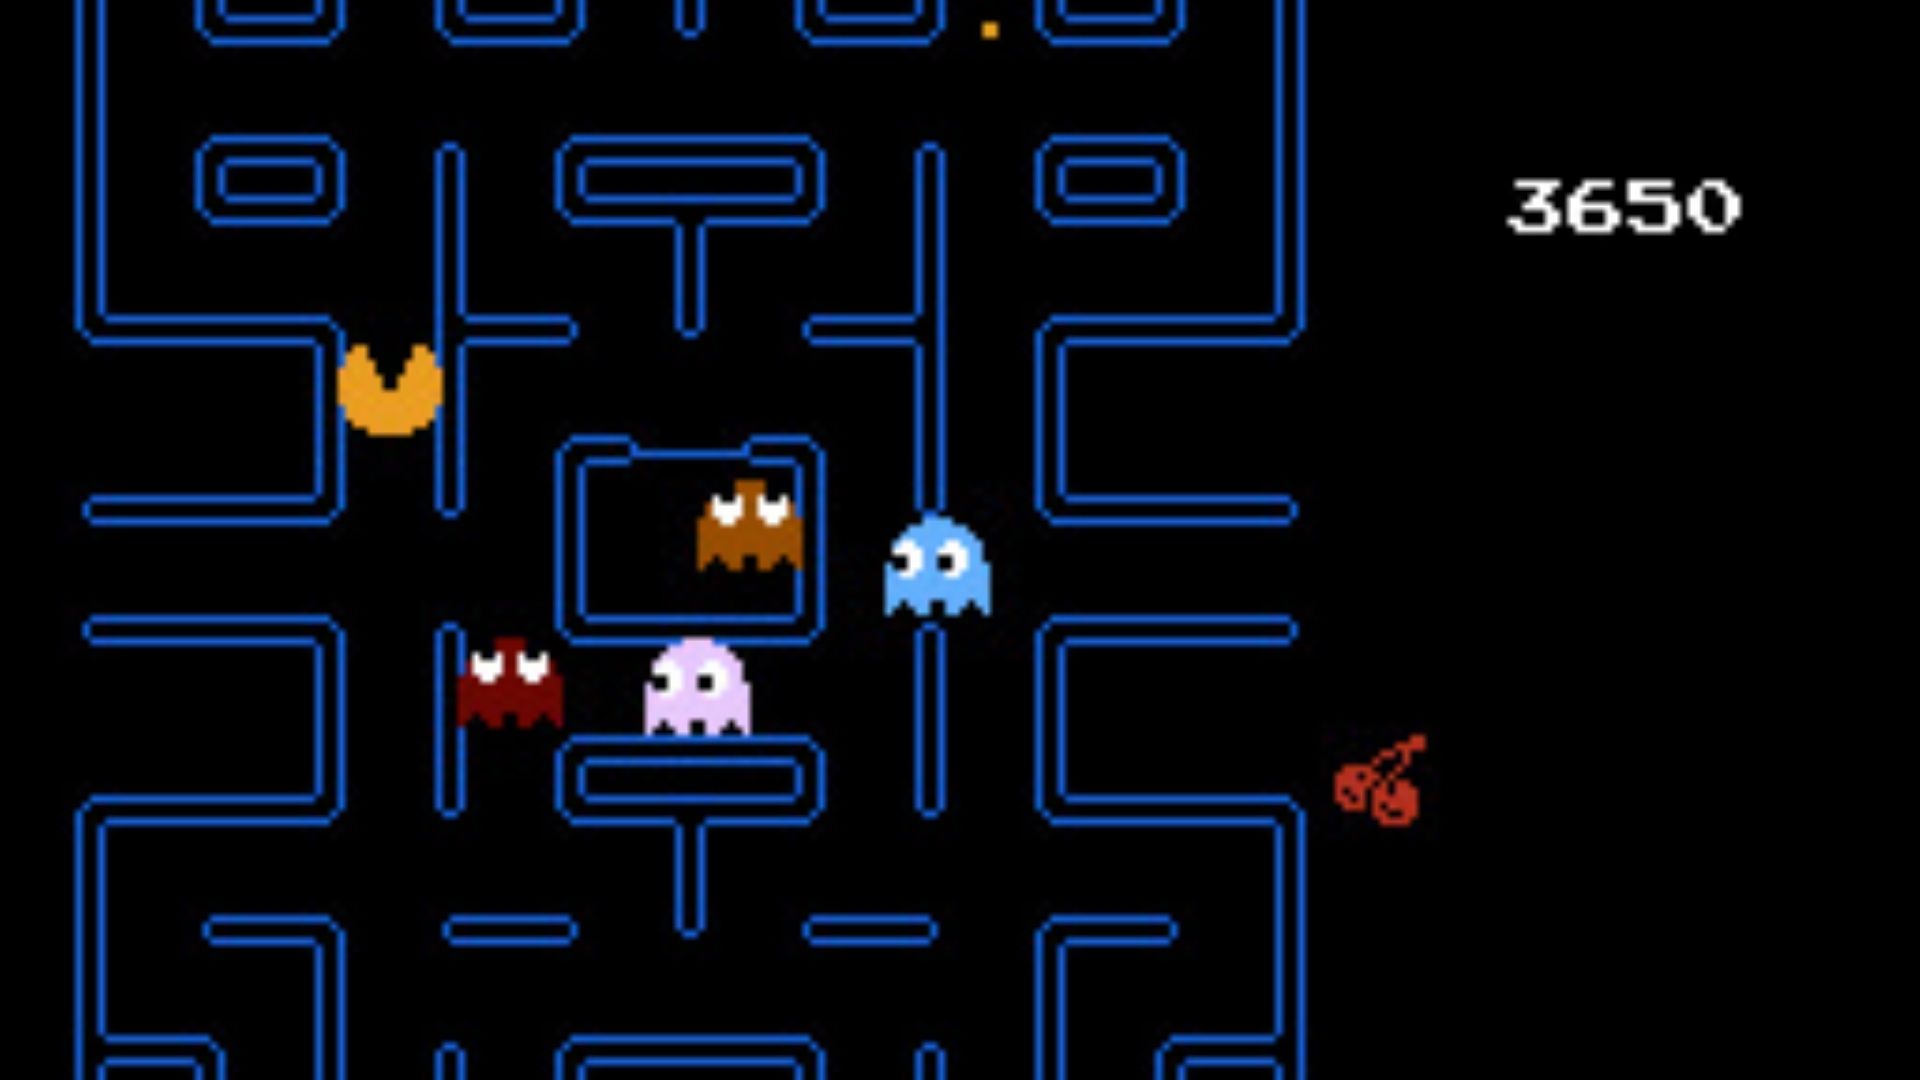 THe Pac-Man maze, with four 'ghosts', and the pac-man, mouth agape. The score is 3650. The player has collected one cherry.